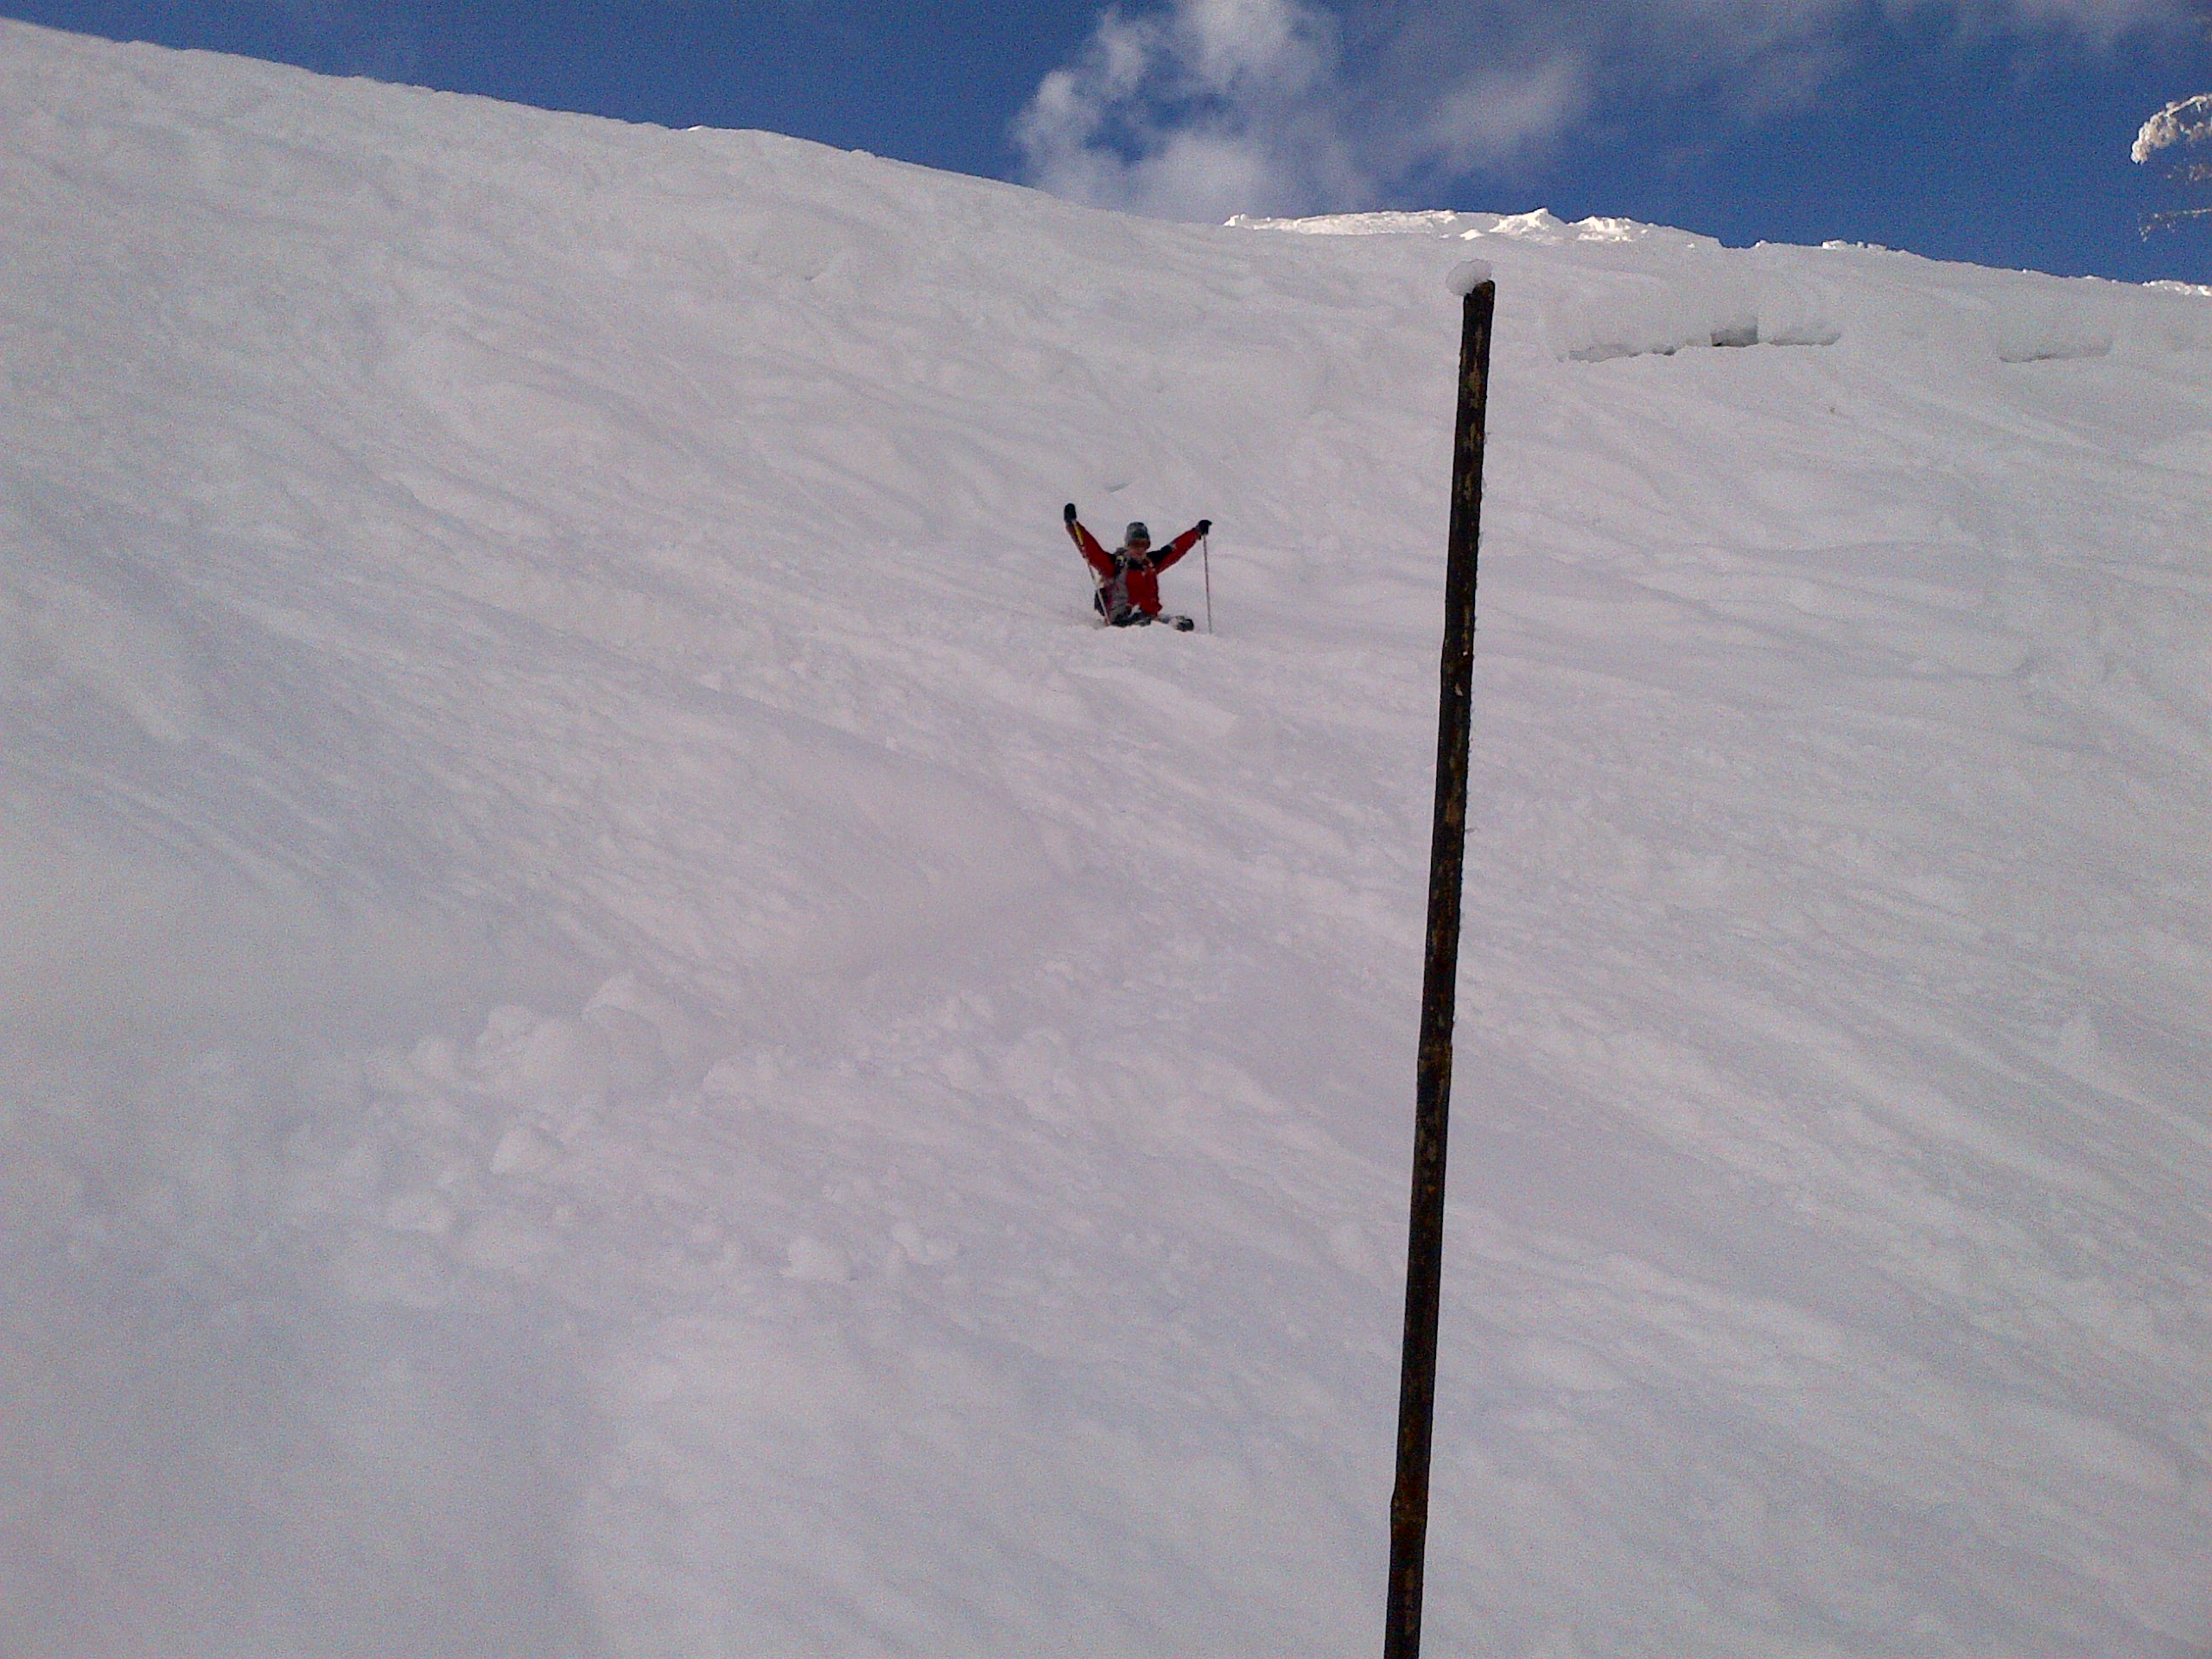 Following one of my first proper tumbles in years - and damn, it was a spectacular one, snowballing down black run "Yeti" when I took a corner too fast - Sarah snapped this picture.